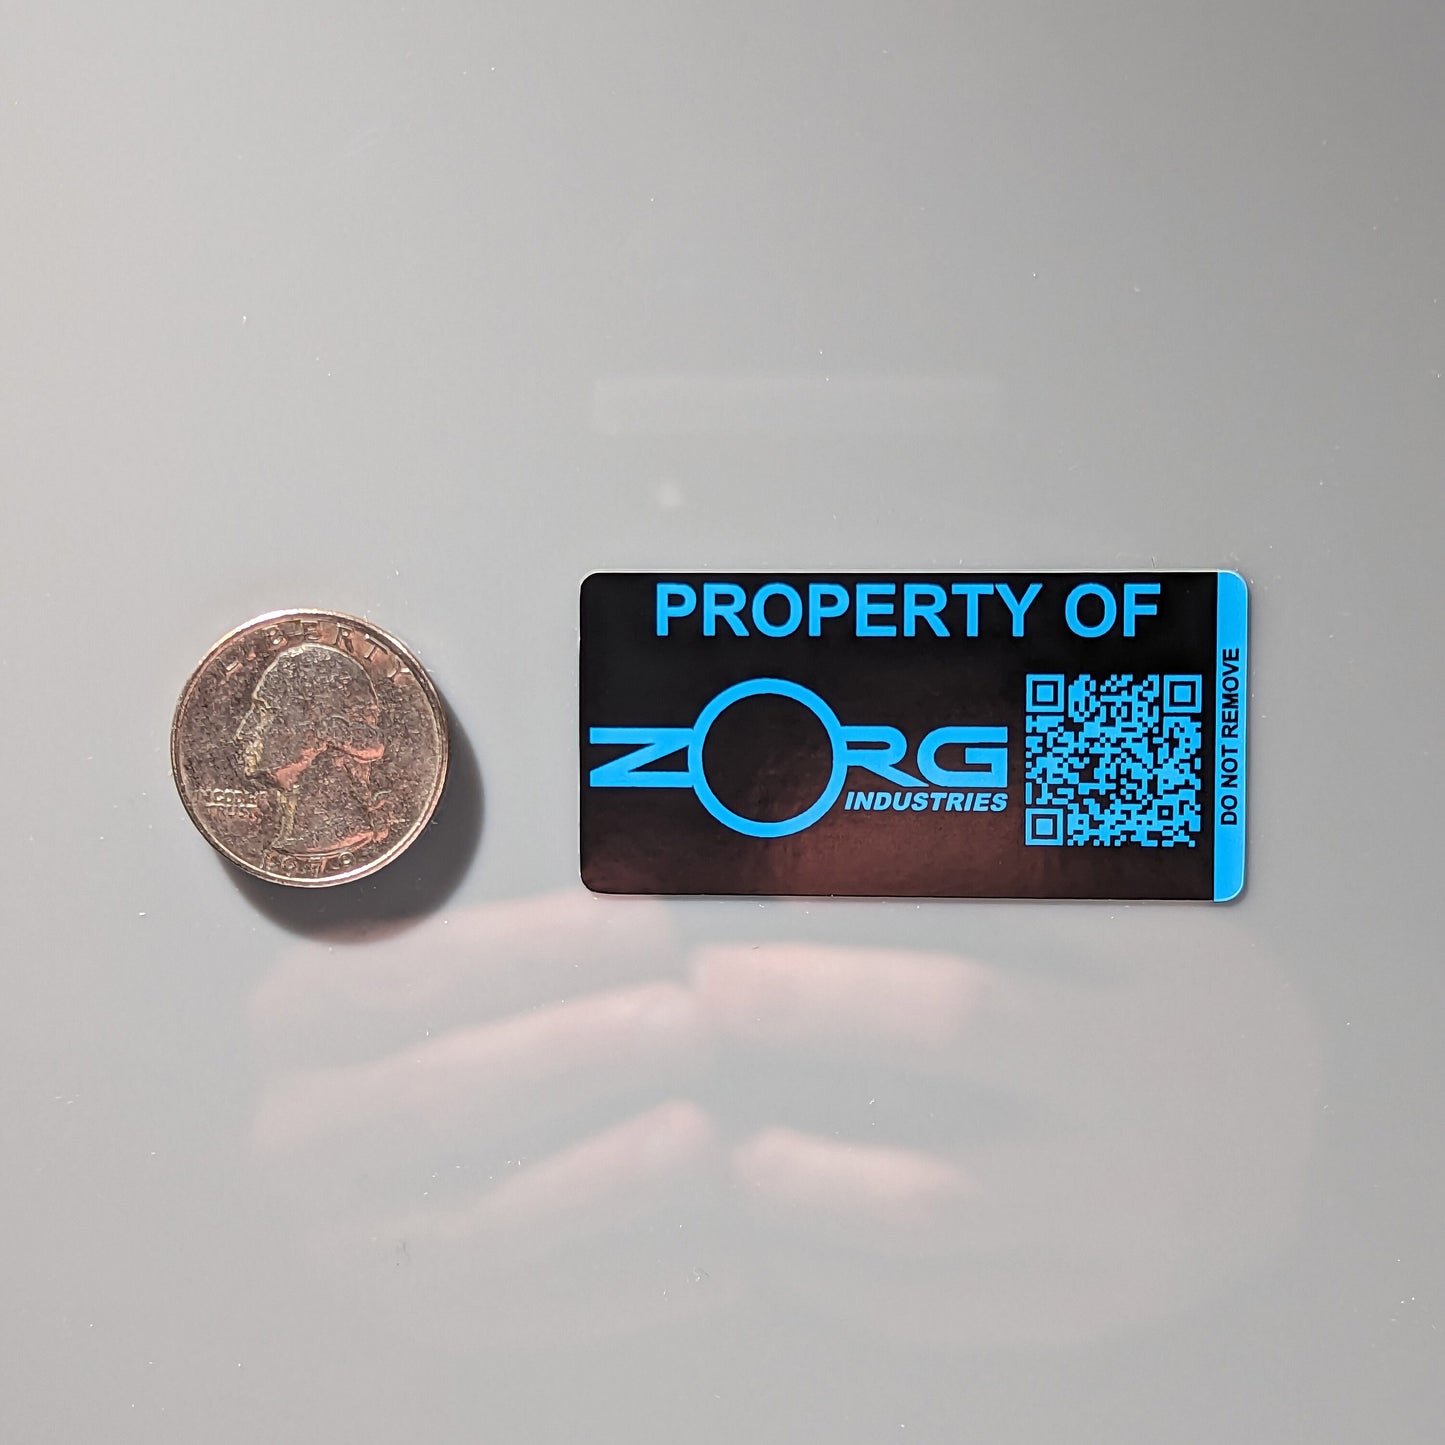 Zorg Industries Asset Tags